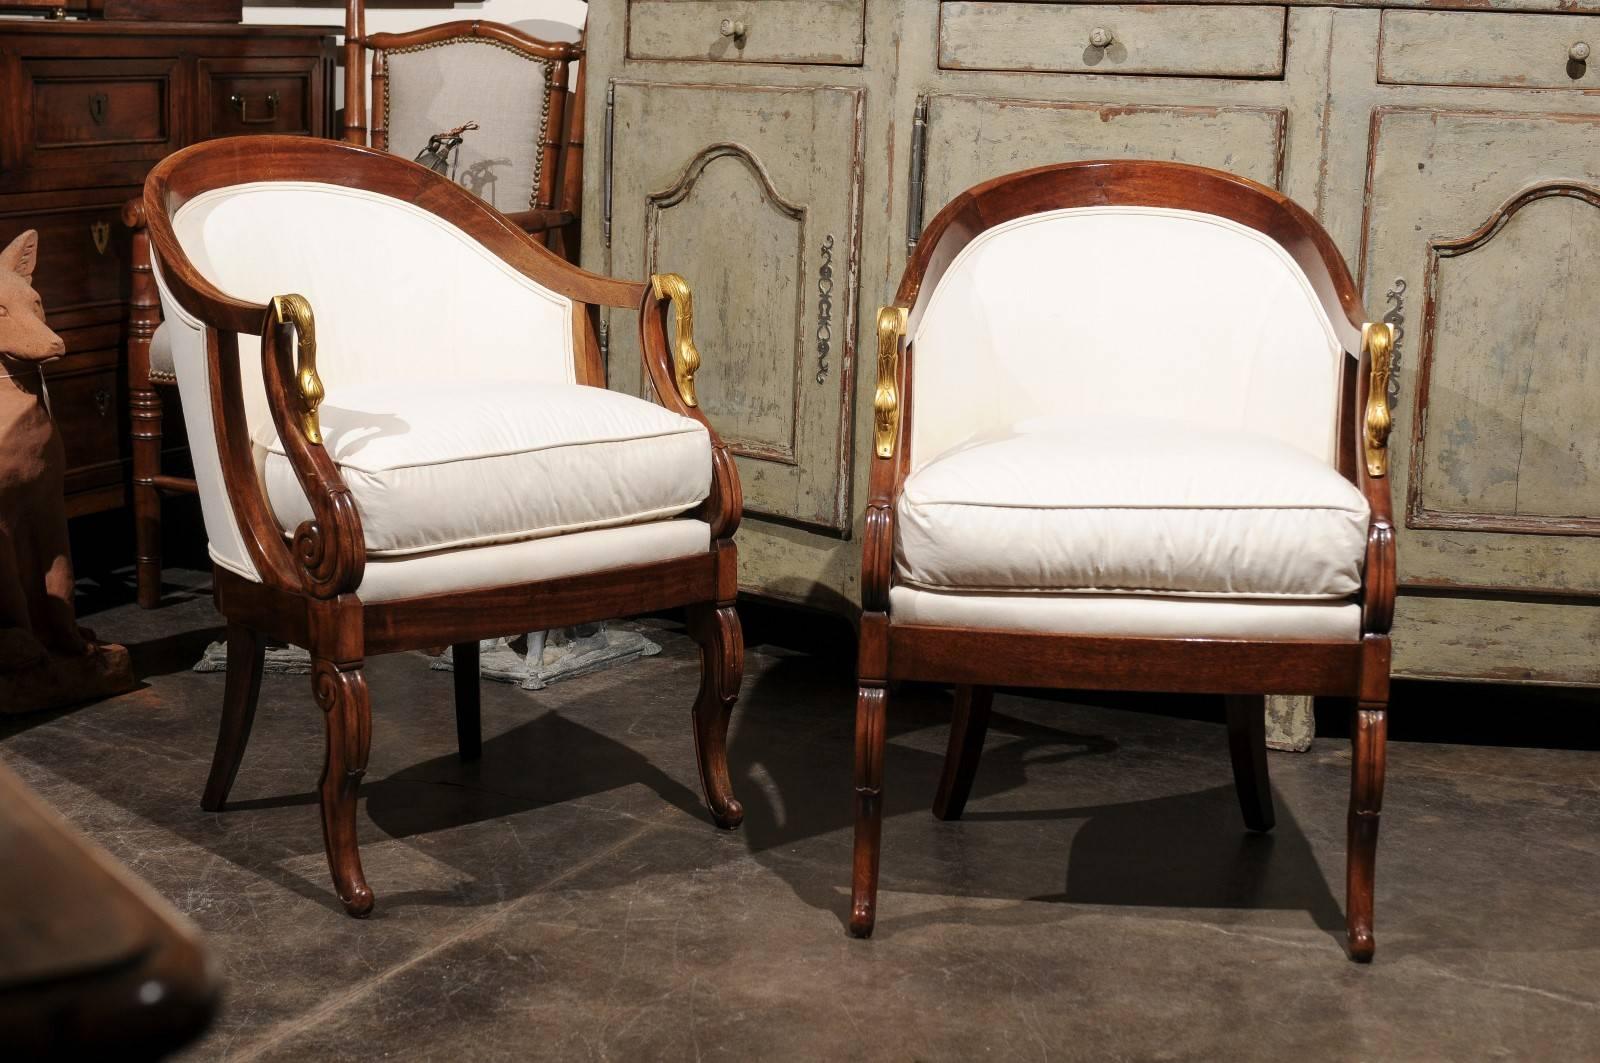 A pair of French Empire style upholstered tub chairs with swan motifs from the second half of the 19th century. Each of this pair of French fauteuils features a wraparound back terminated with exquisite pierced arms. These arms are made of S-scroll